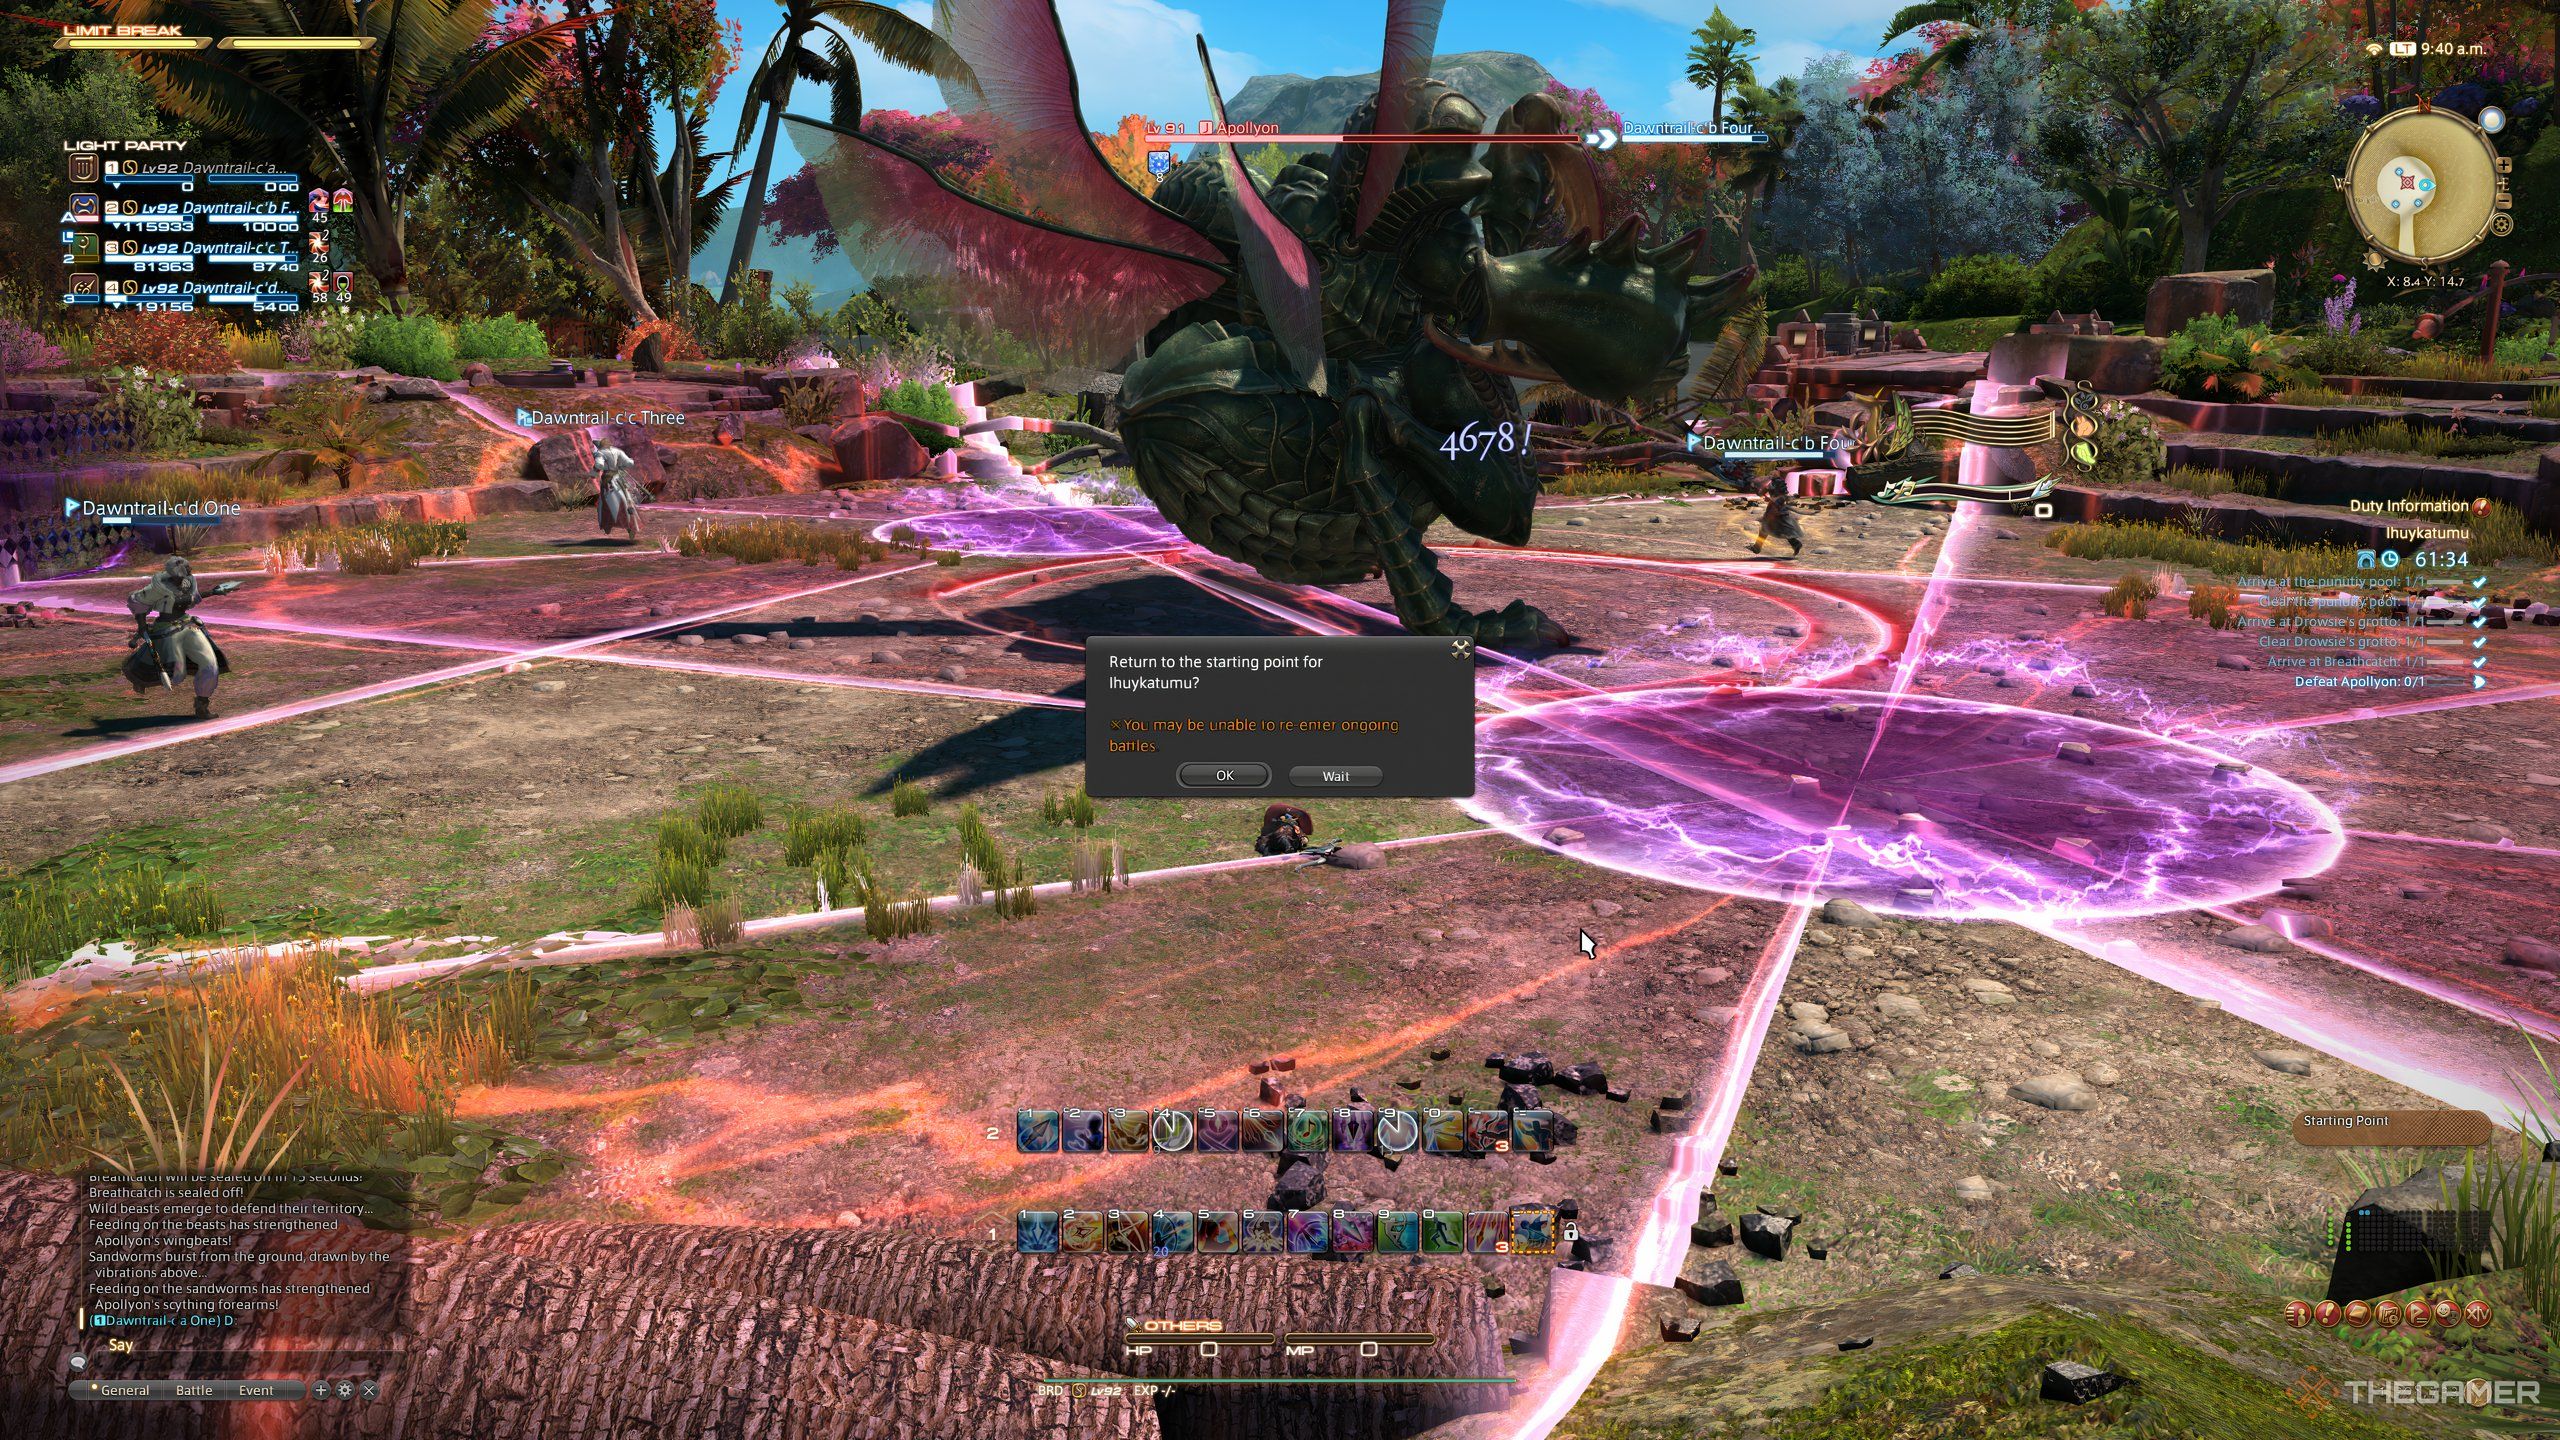 Dead on the final boss of the Ihuykatumu dungeon in Final Fantasy 14.